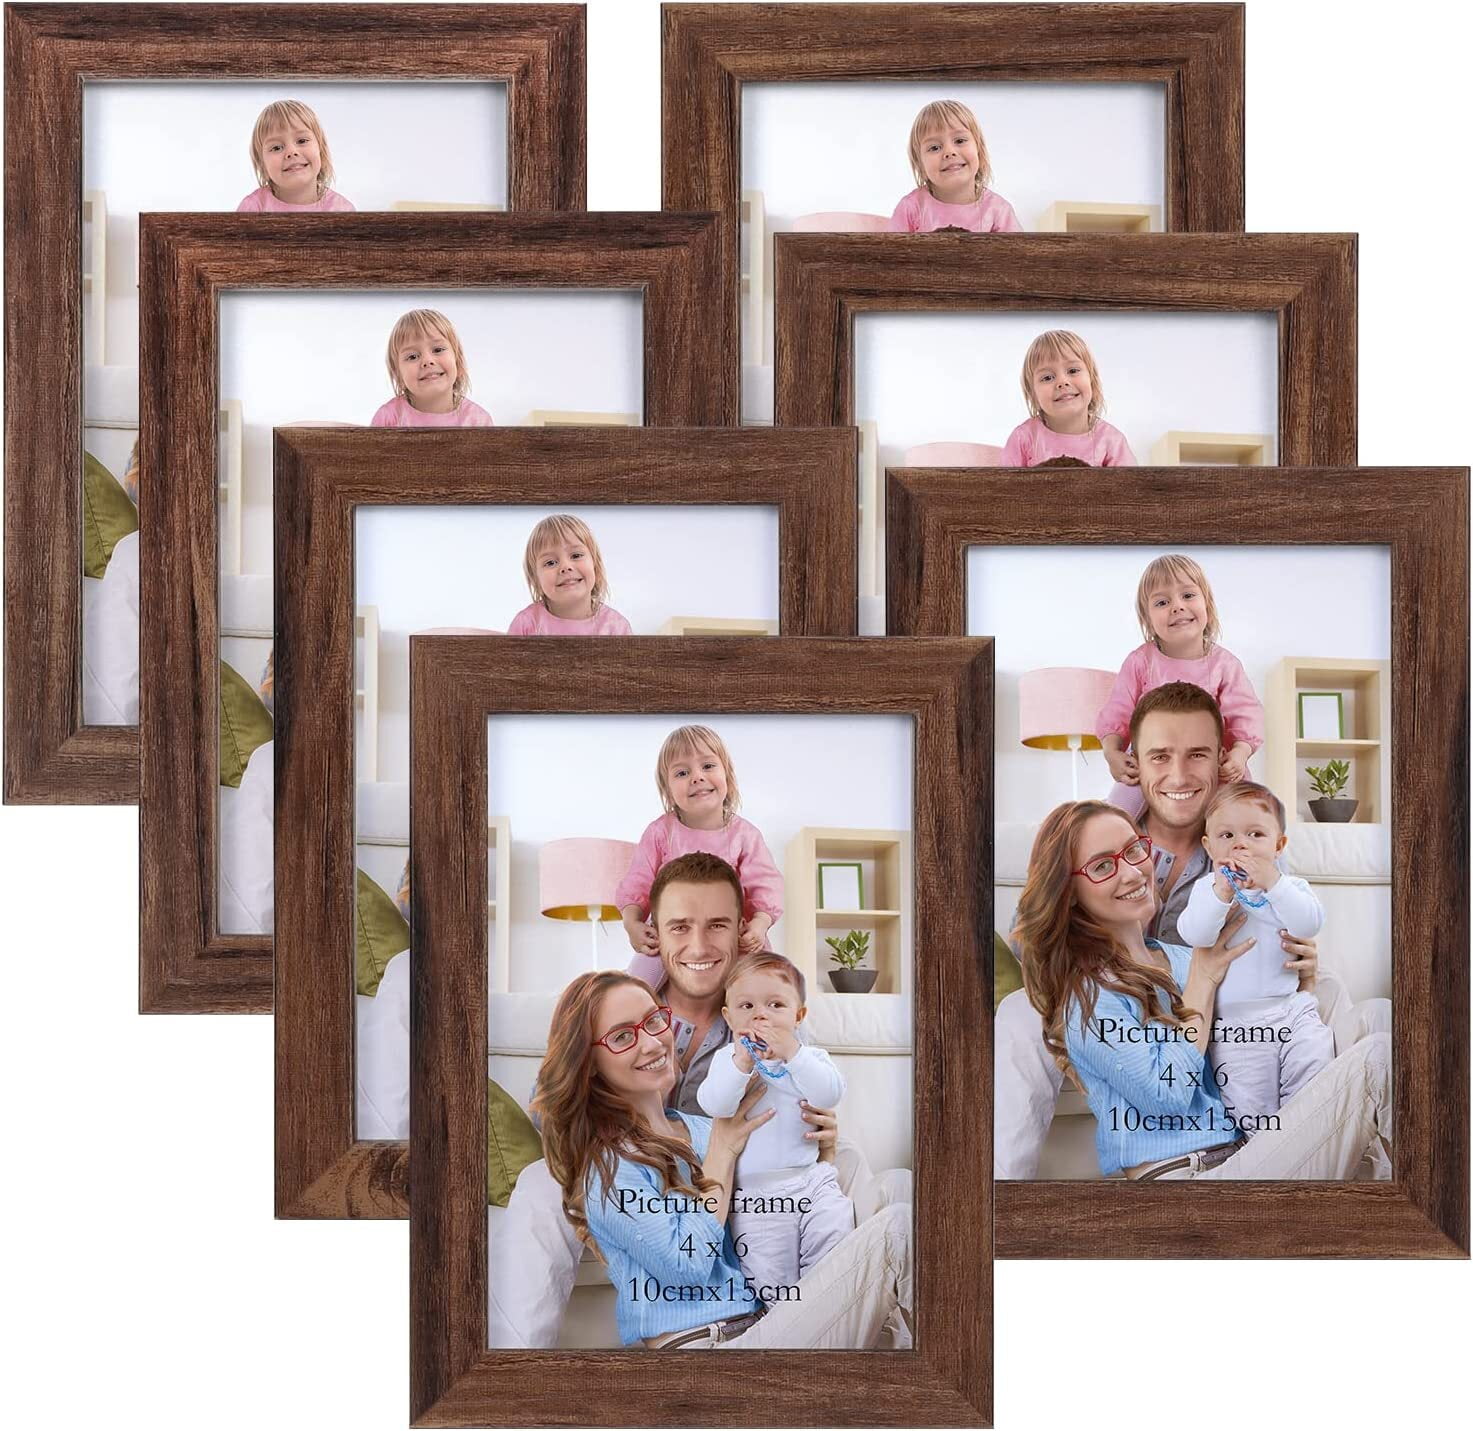 Solid Wood Rustic Picture Frames 4X6 Display for Wall Decor